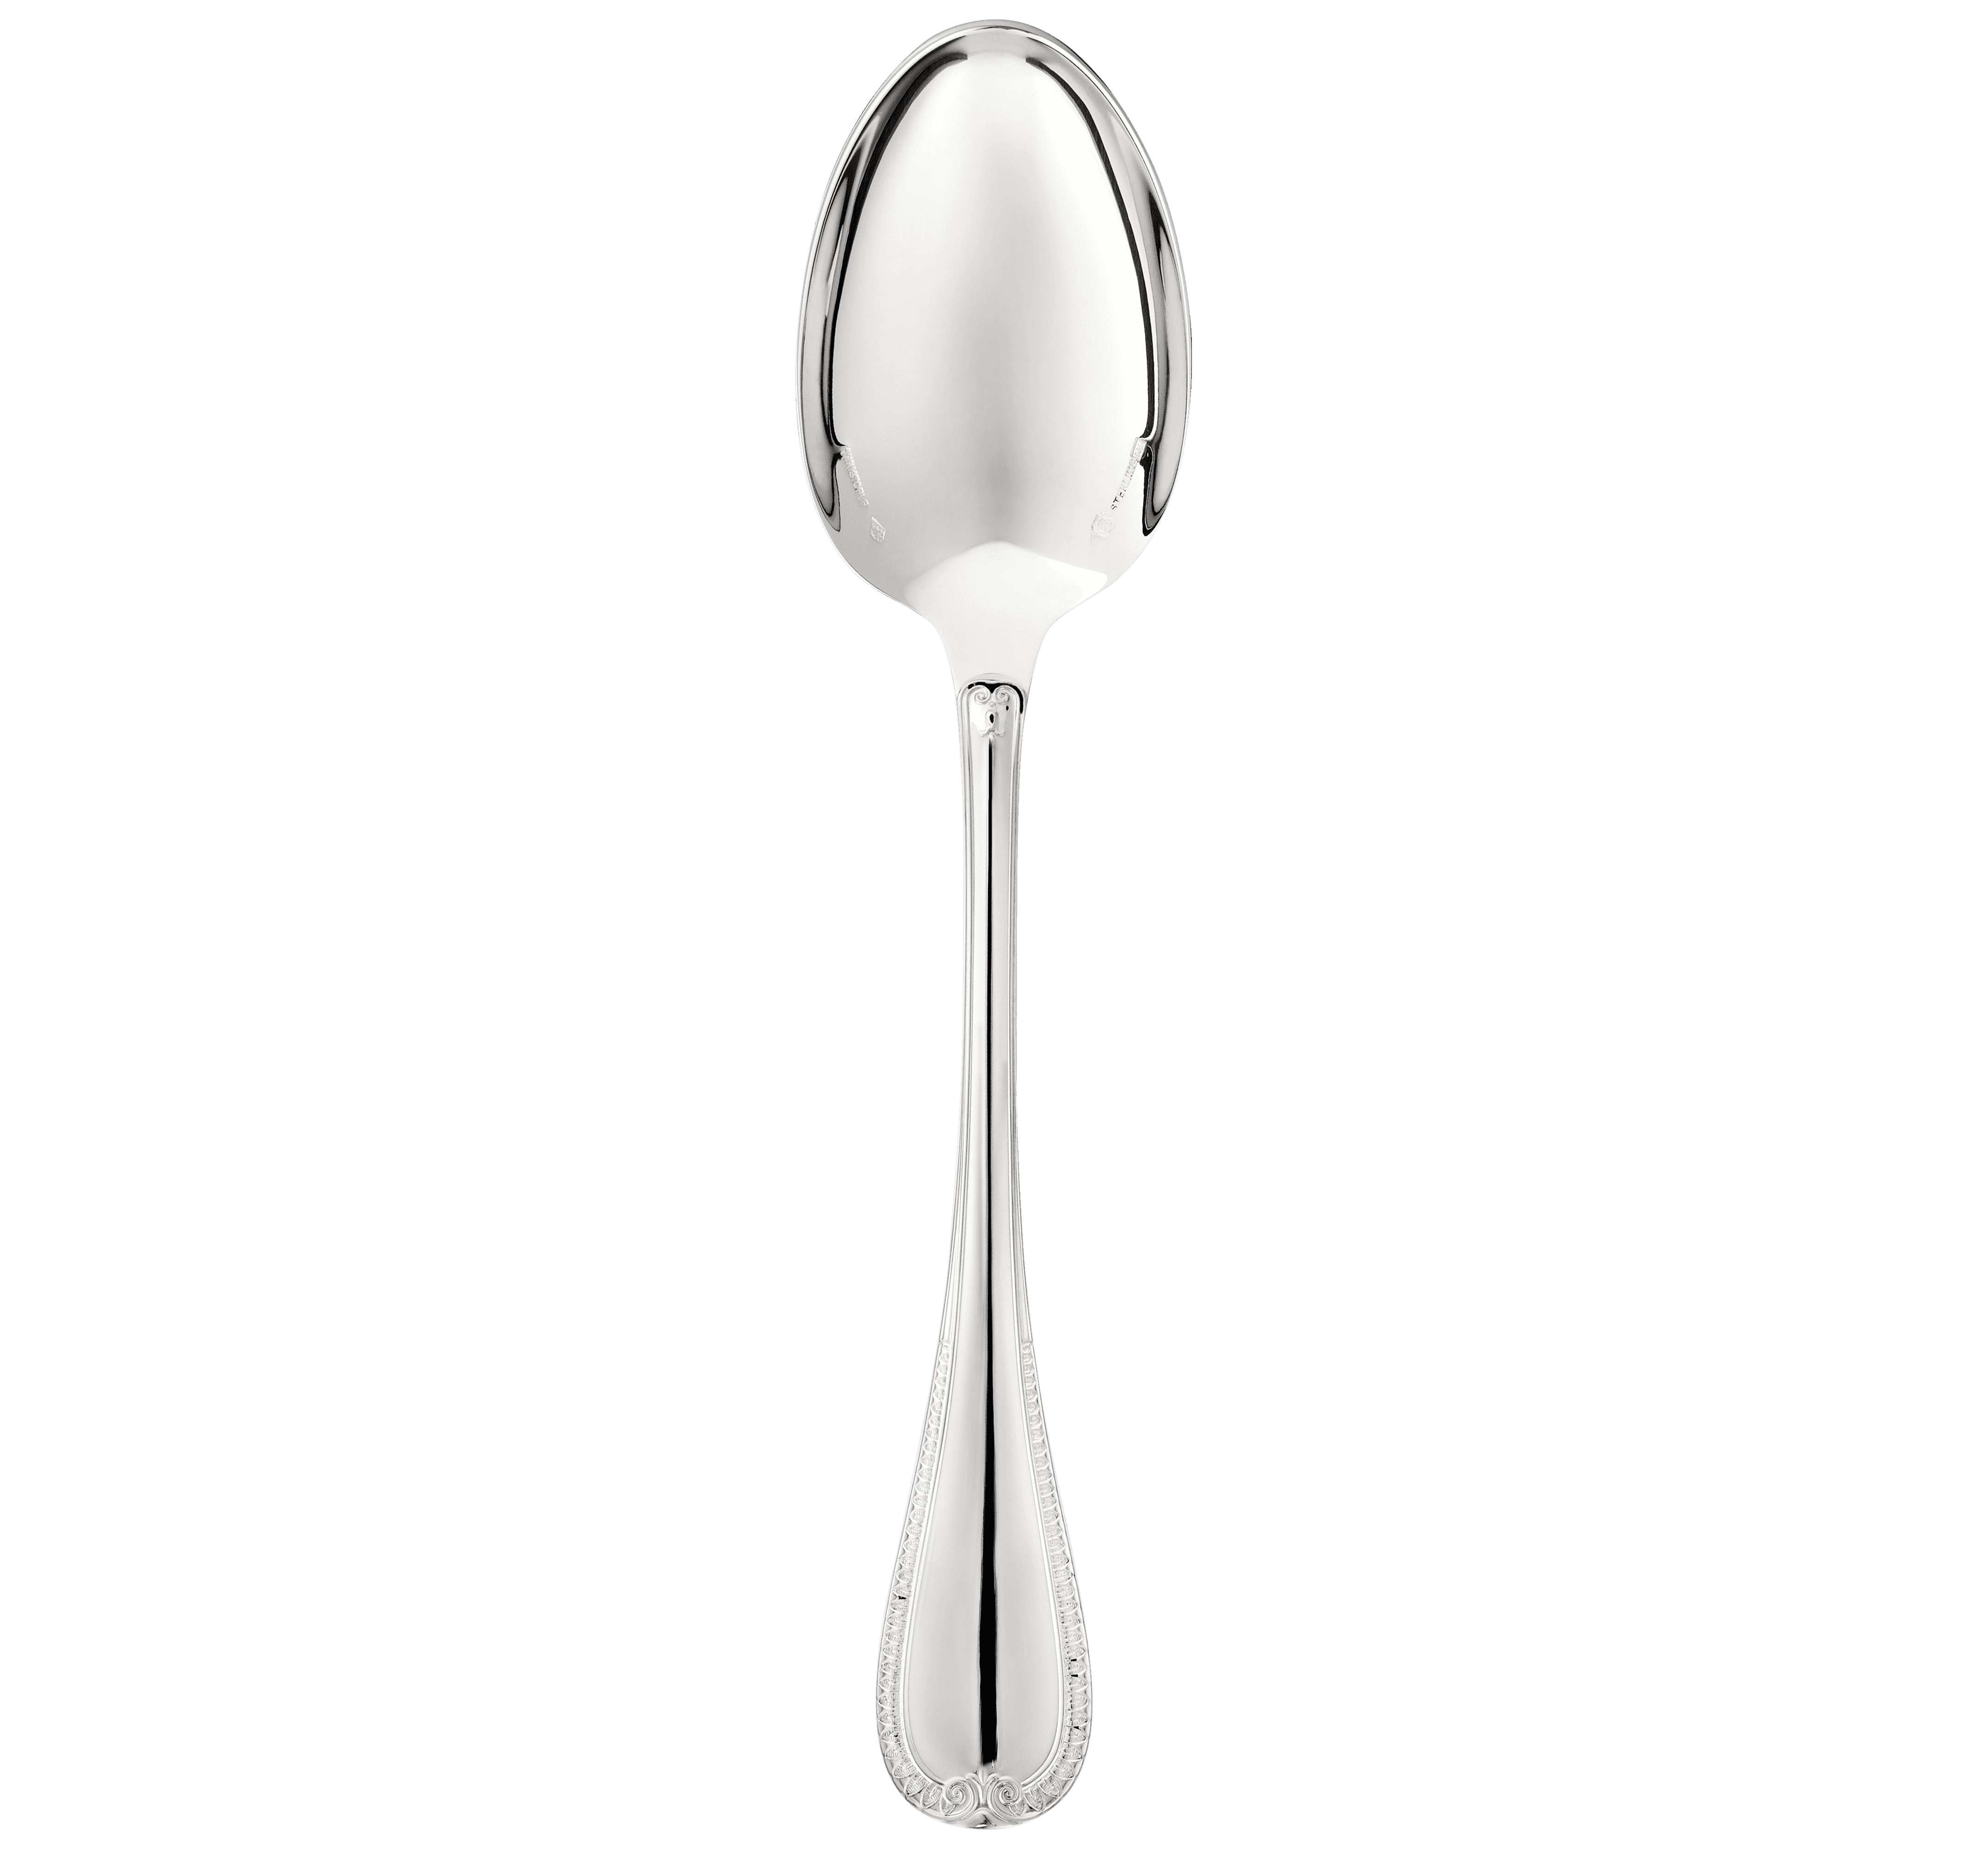 Kitchenware. Set of spoons salad spoon, soup spoon, tablespoon